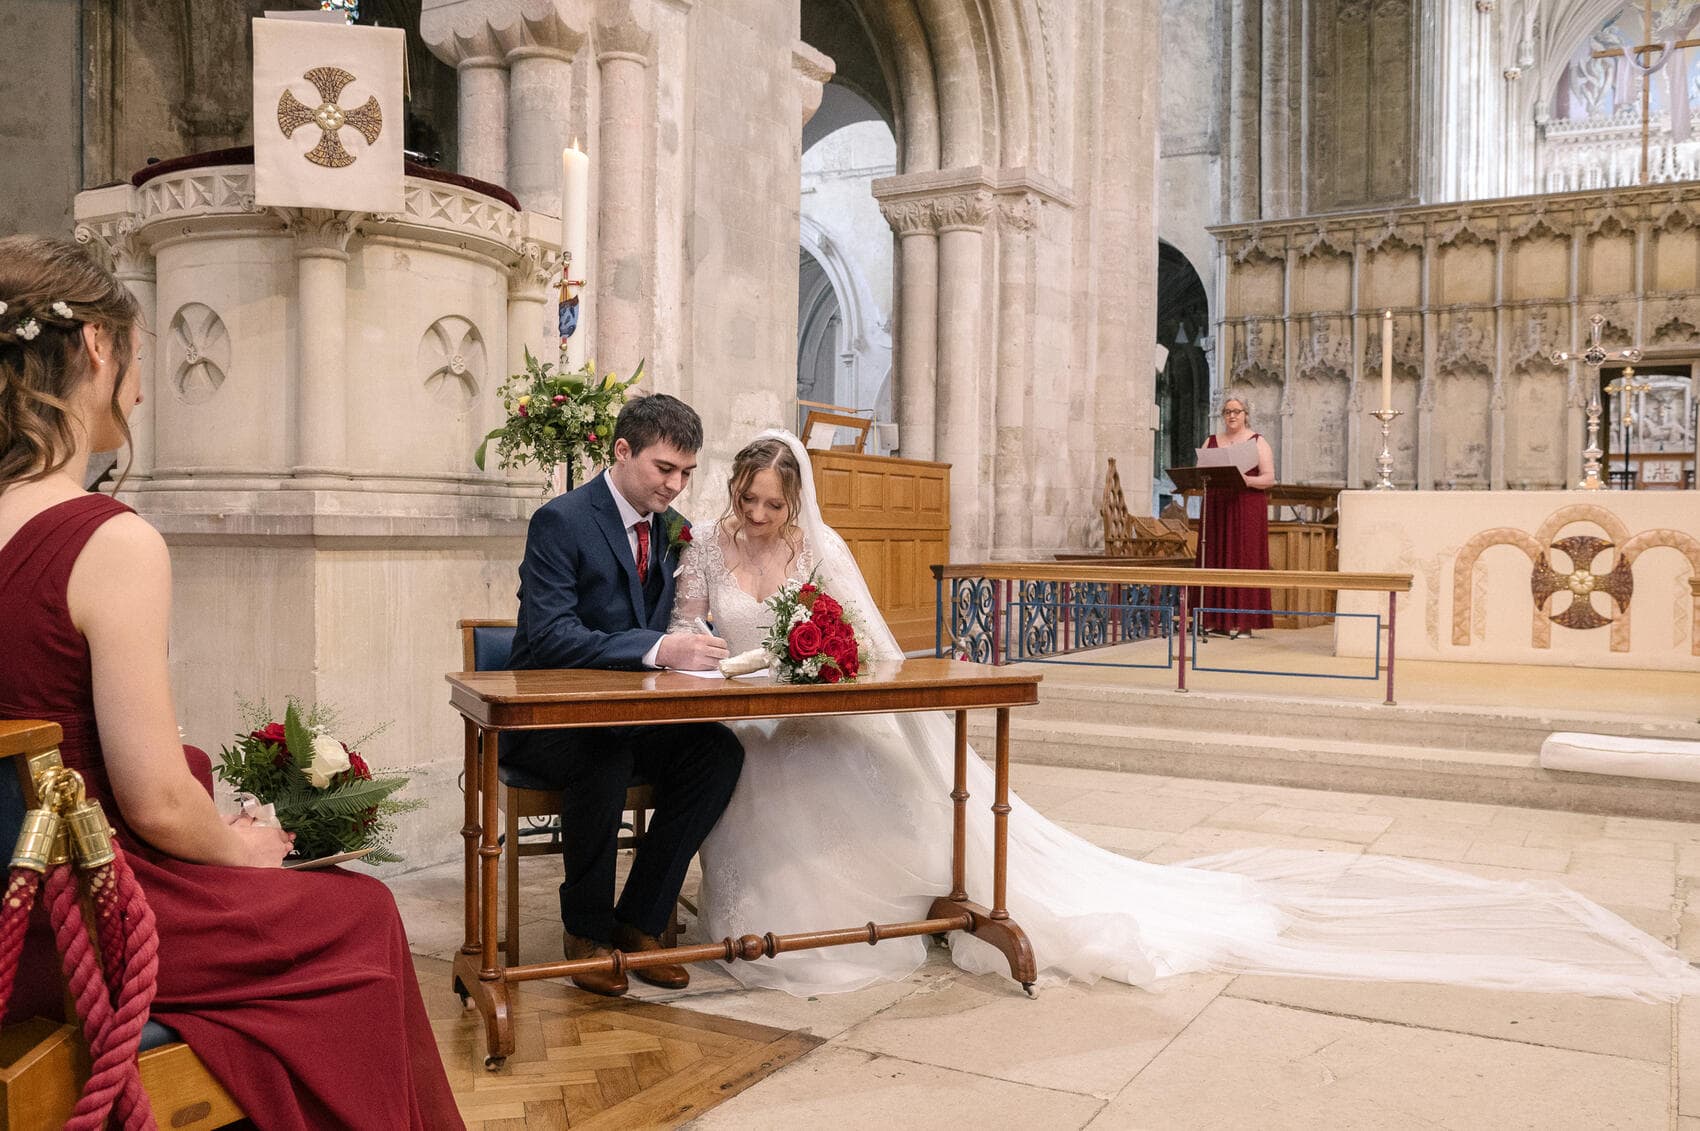 Signing the register at Christchurch Priory wedding ceremony